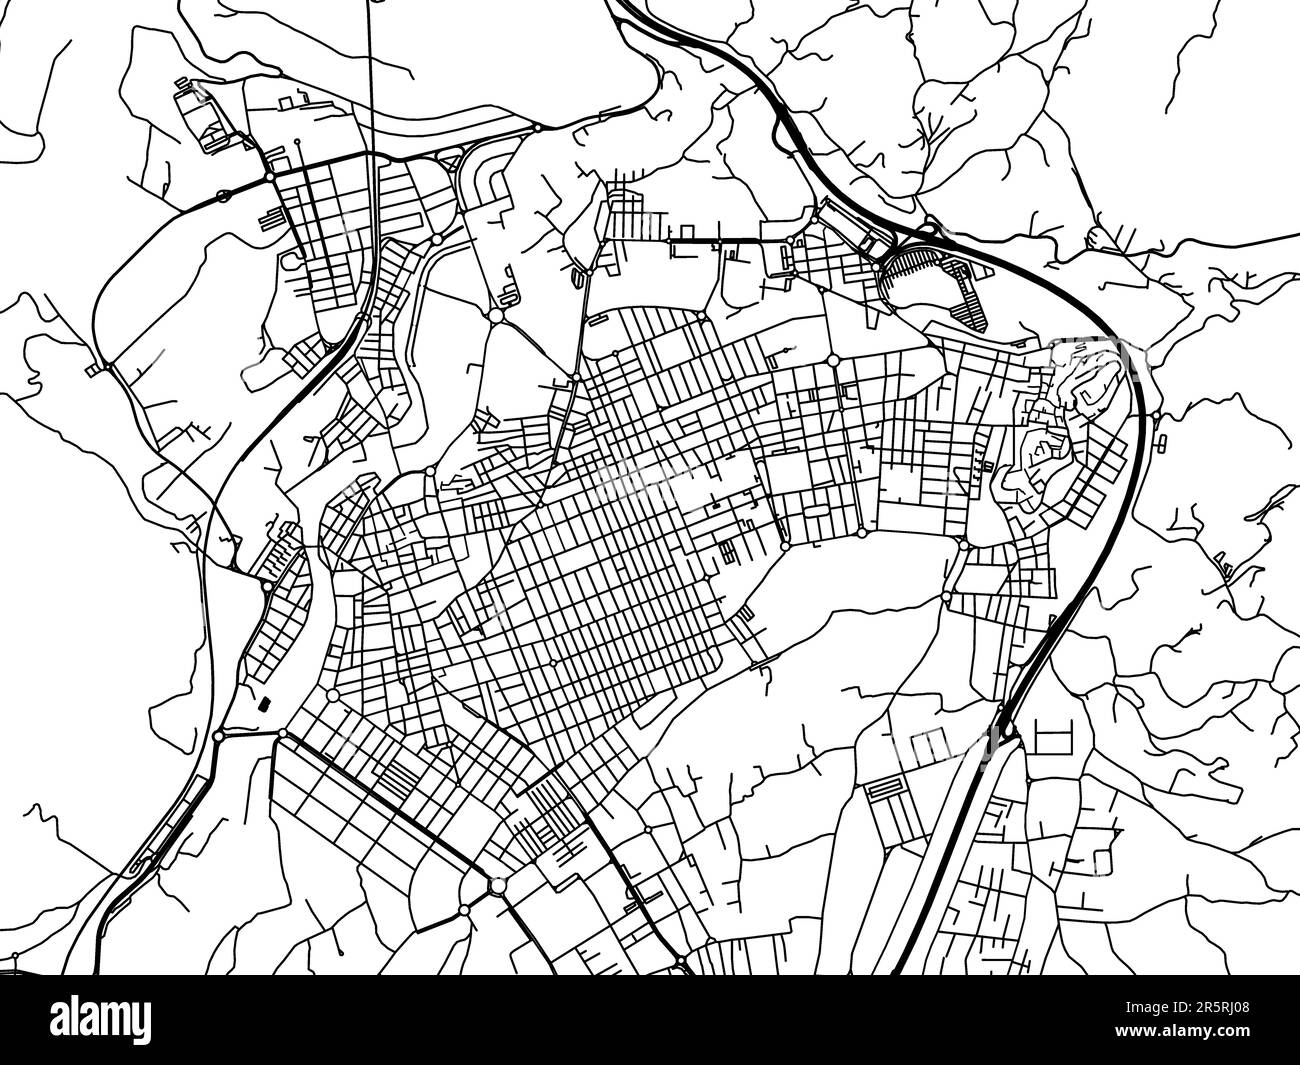 Vector road map of the city of Elda in Spain on a white background ...